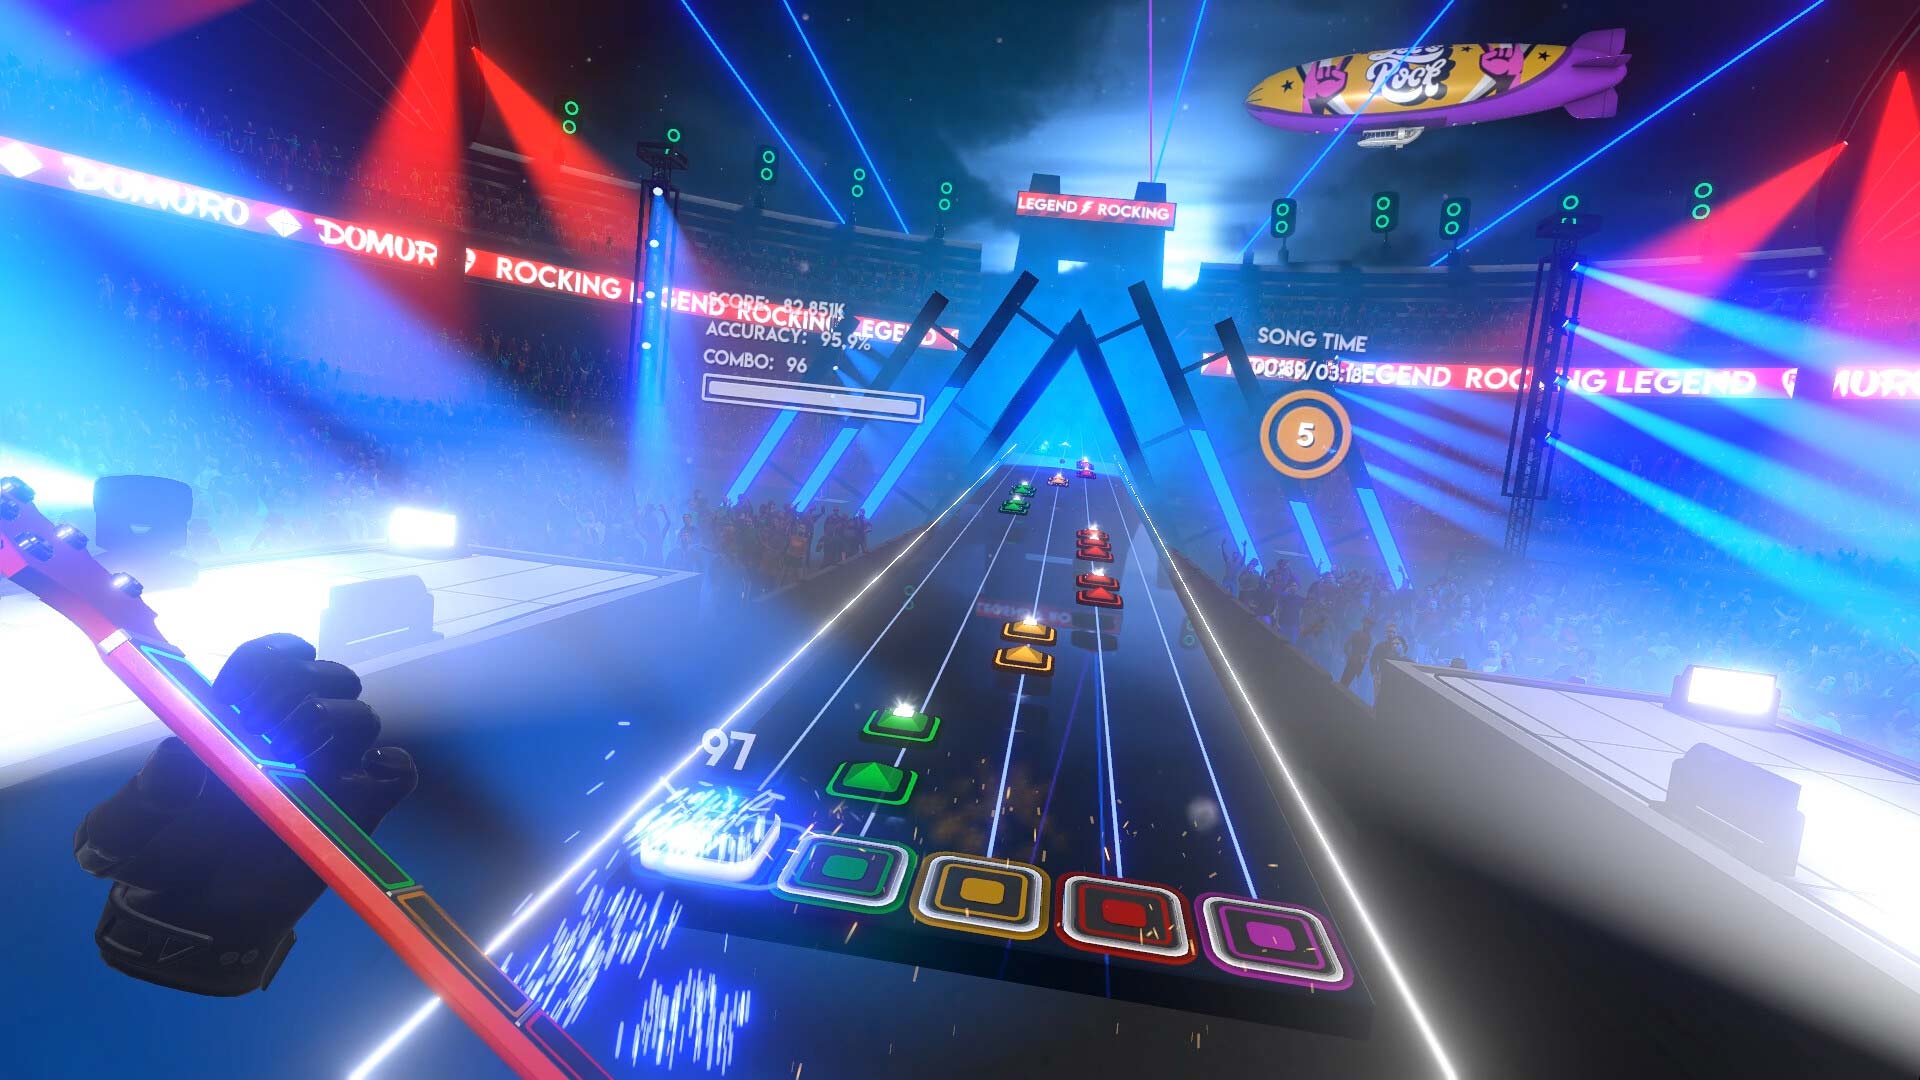 ‘Rocking Legend’ is Like VR ‘Rock Band’ Without Needing a Closet Full of Plastic Instruments